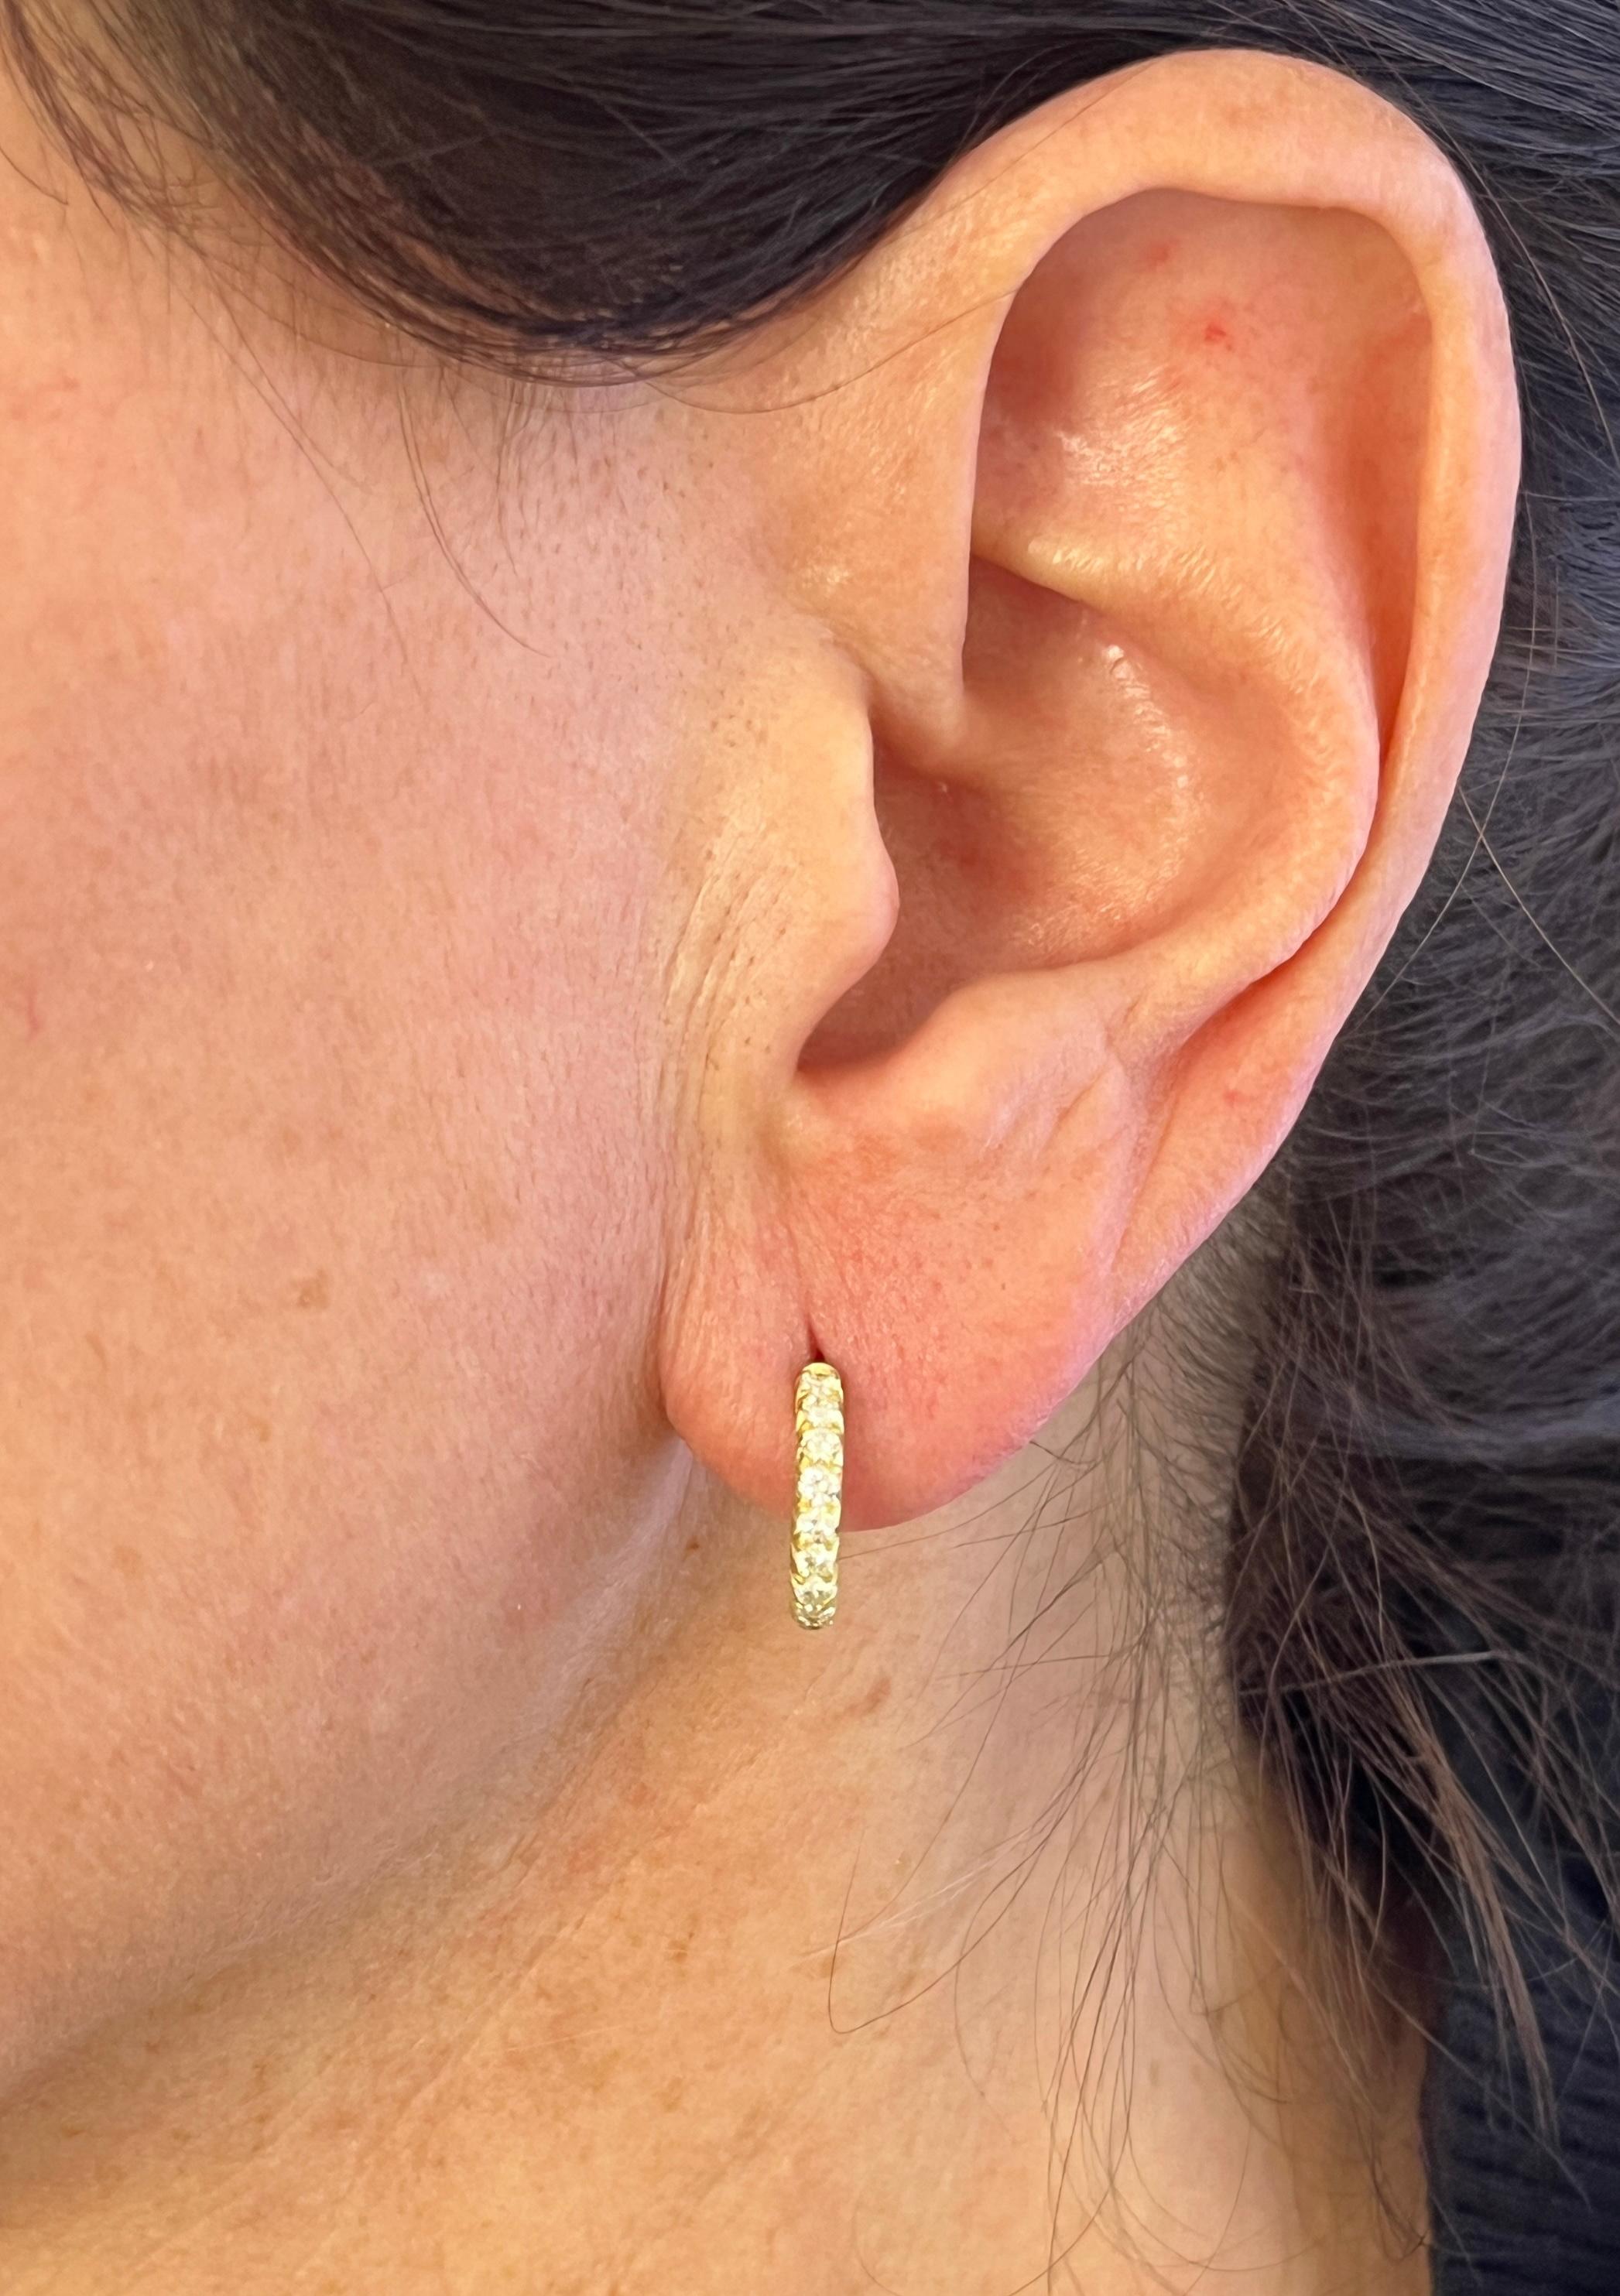 Handcrafted in 18 Karat Gold, Faye's Diamond Micro Pave hoops with posts will quickly become your go-to earrings. Ideal for both casual and formal occasions, these earrings are a perfect fit and will work with any wardrobe. Matte gold enhances the